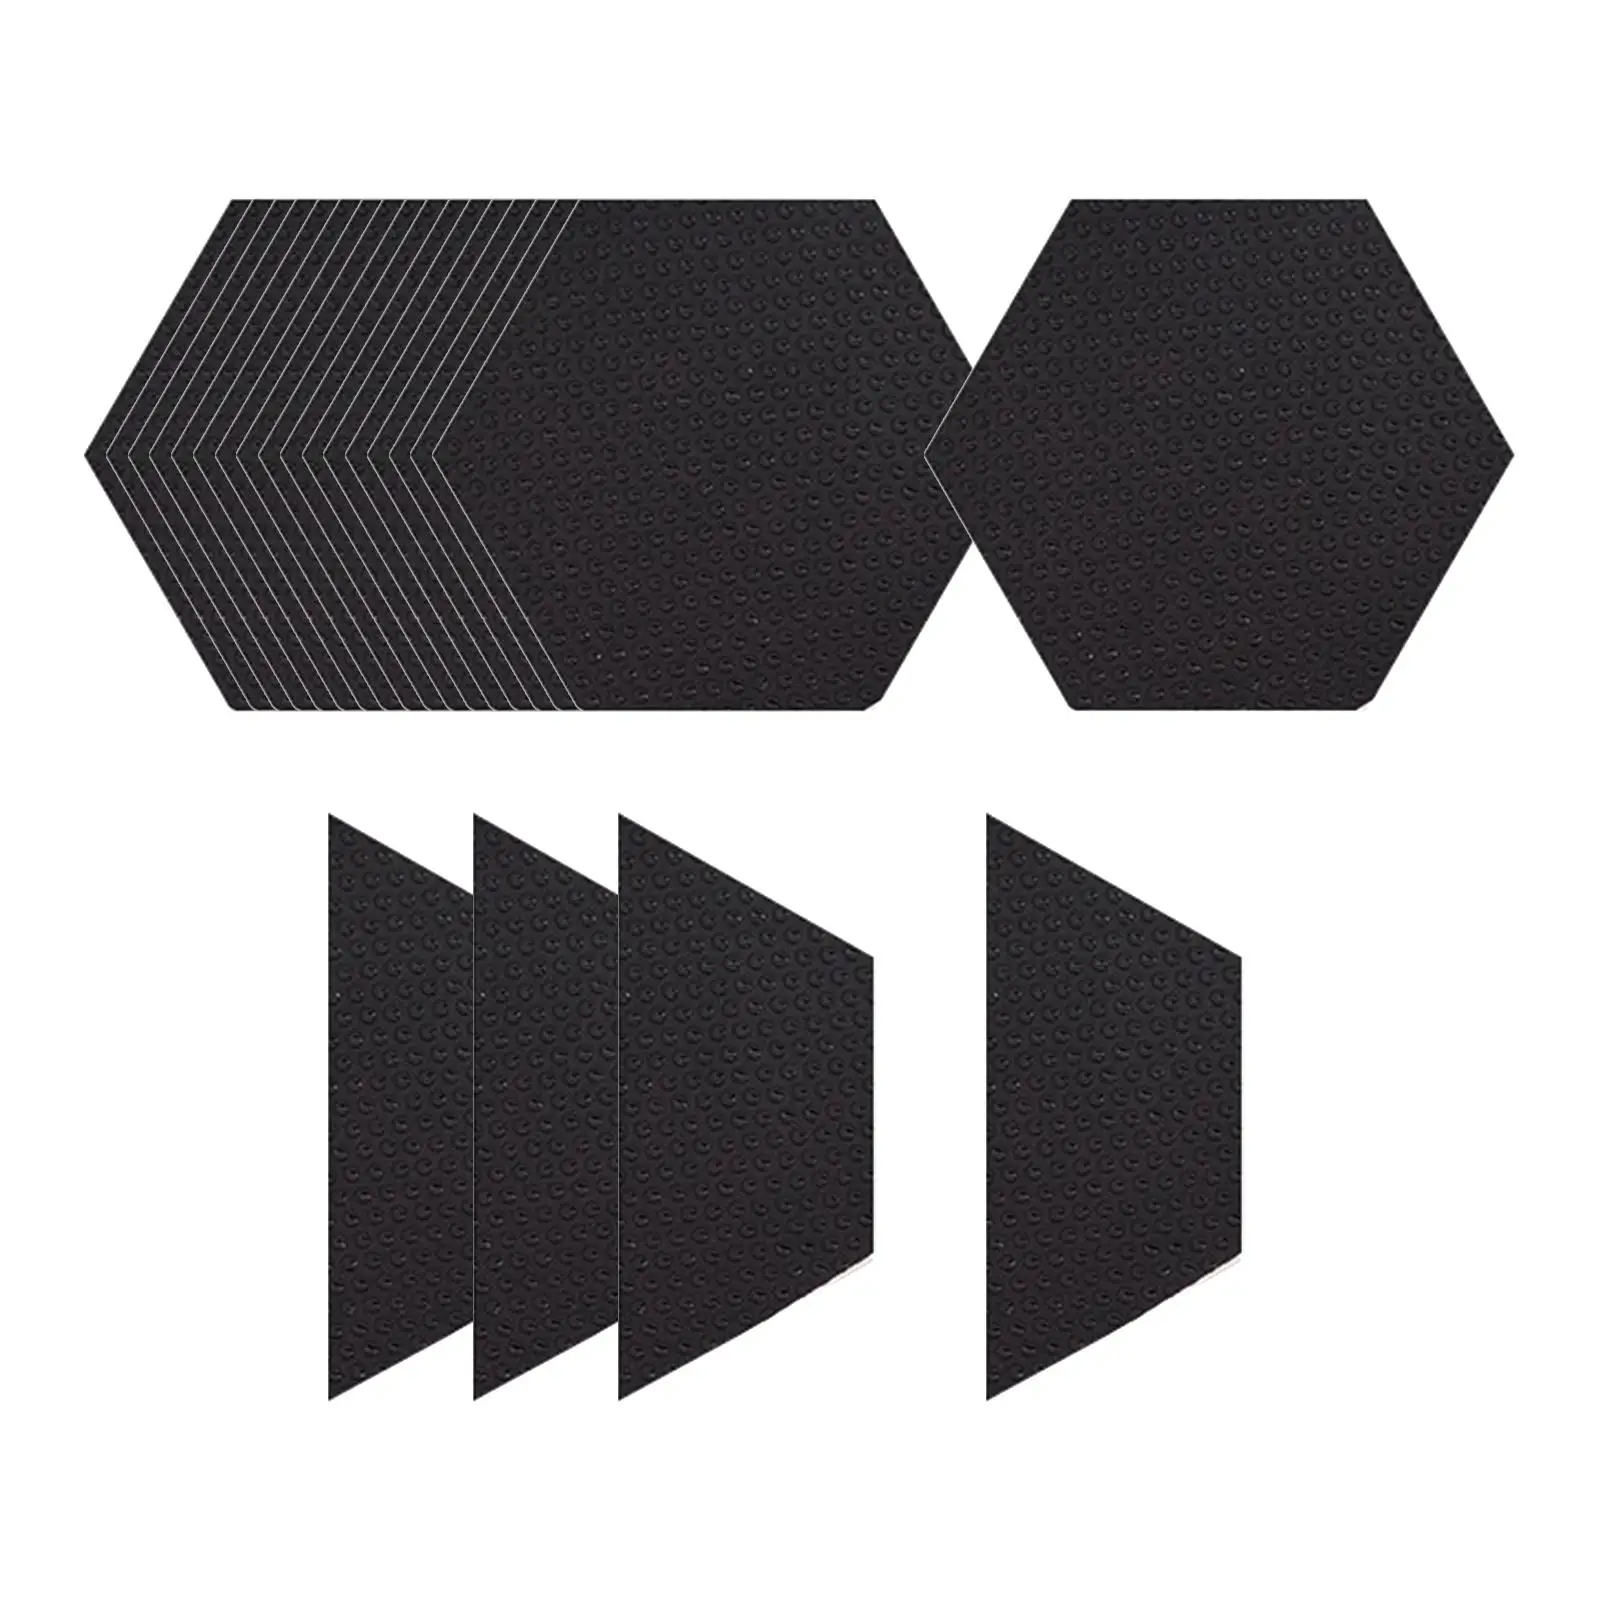 Hexagon Surfboard Traction Pads for Skimboarding Kiteboards Paddleboard